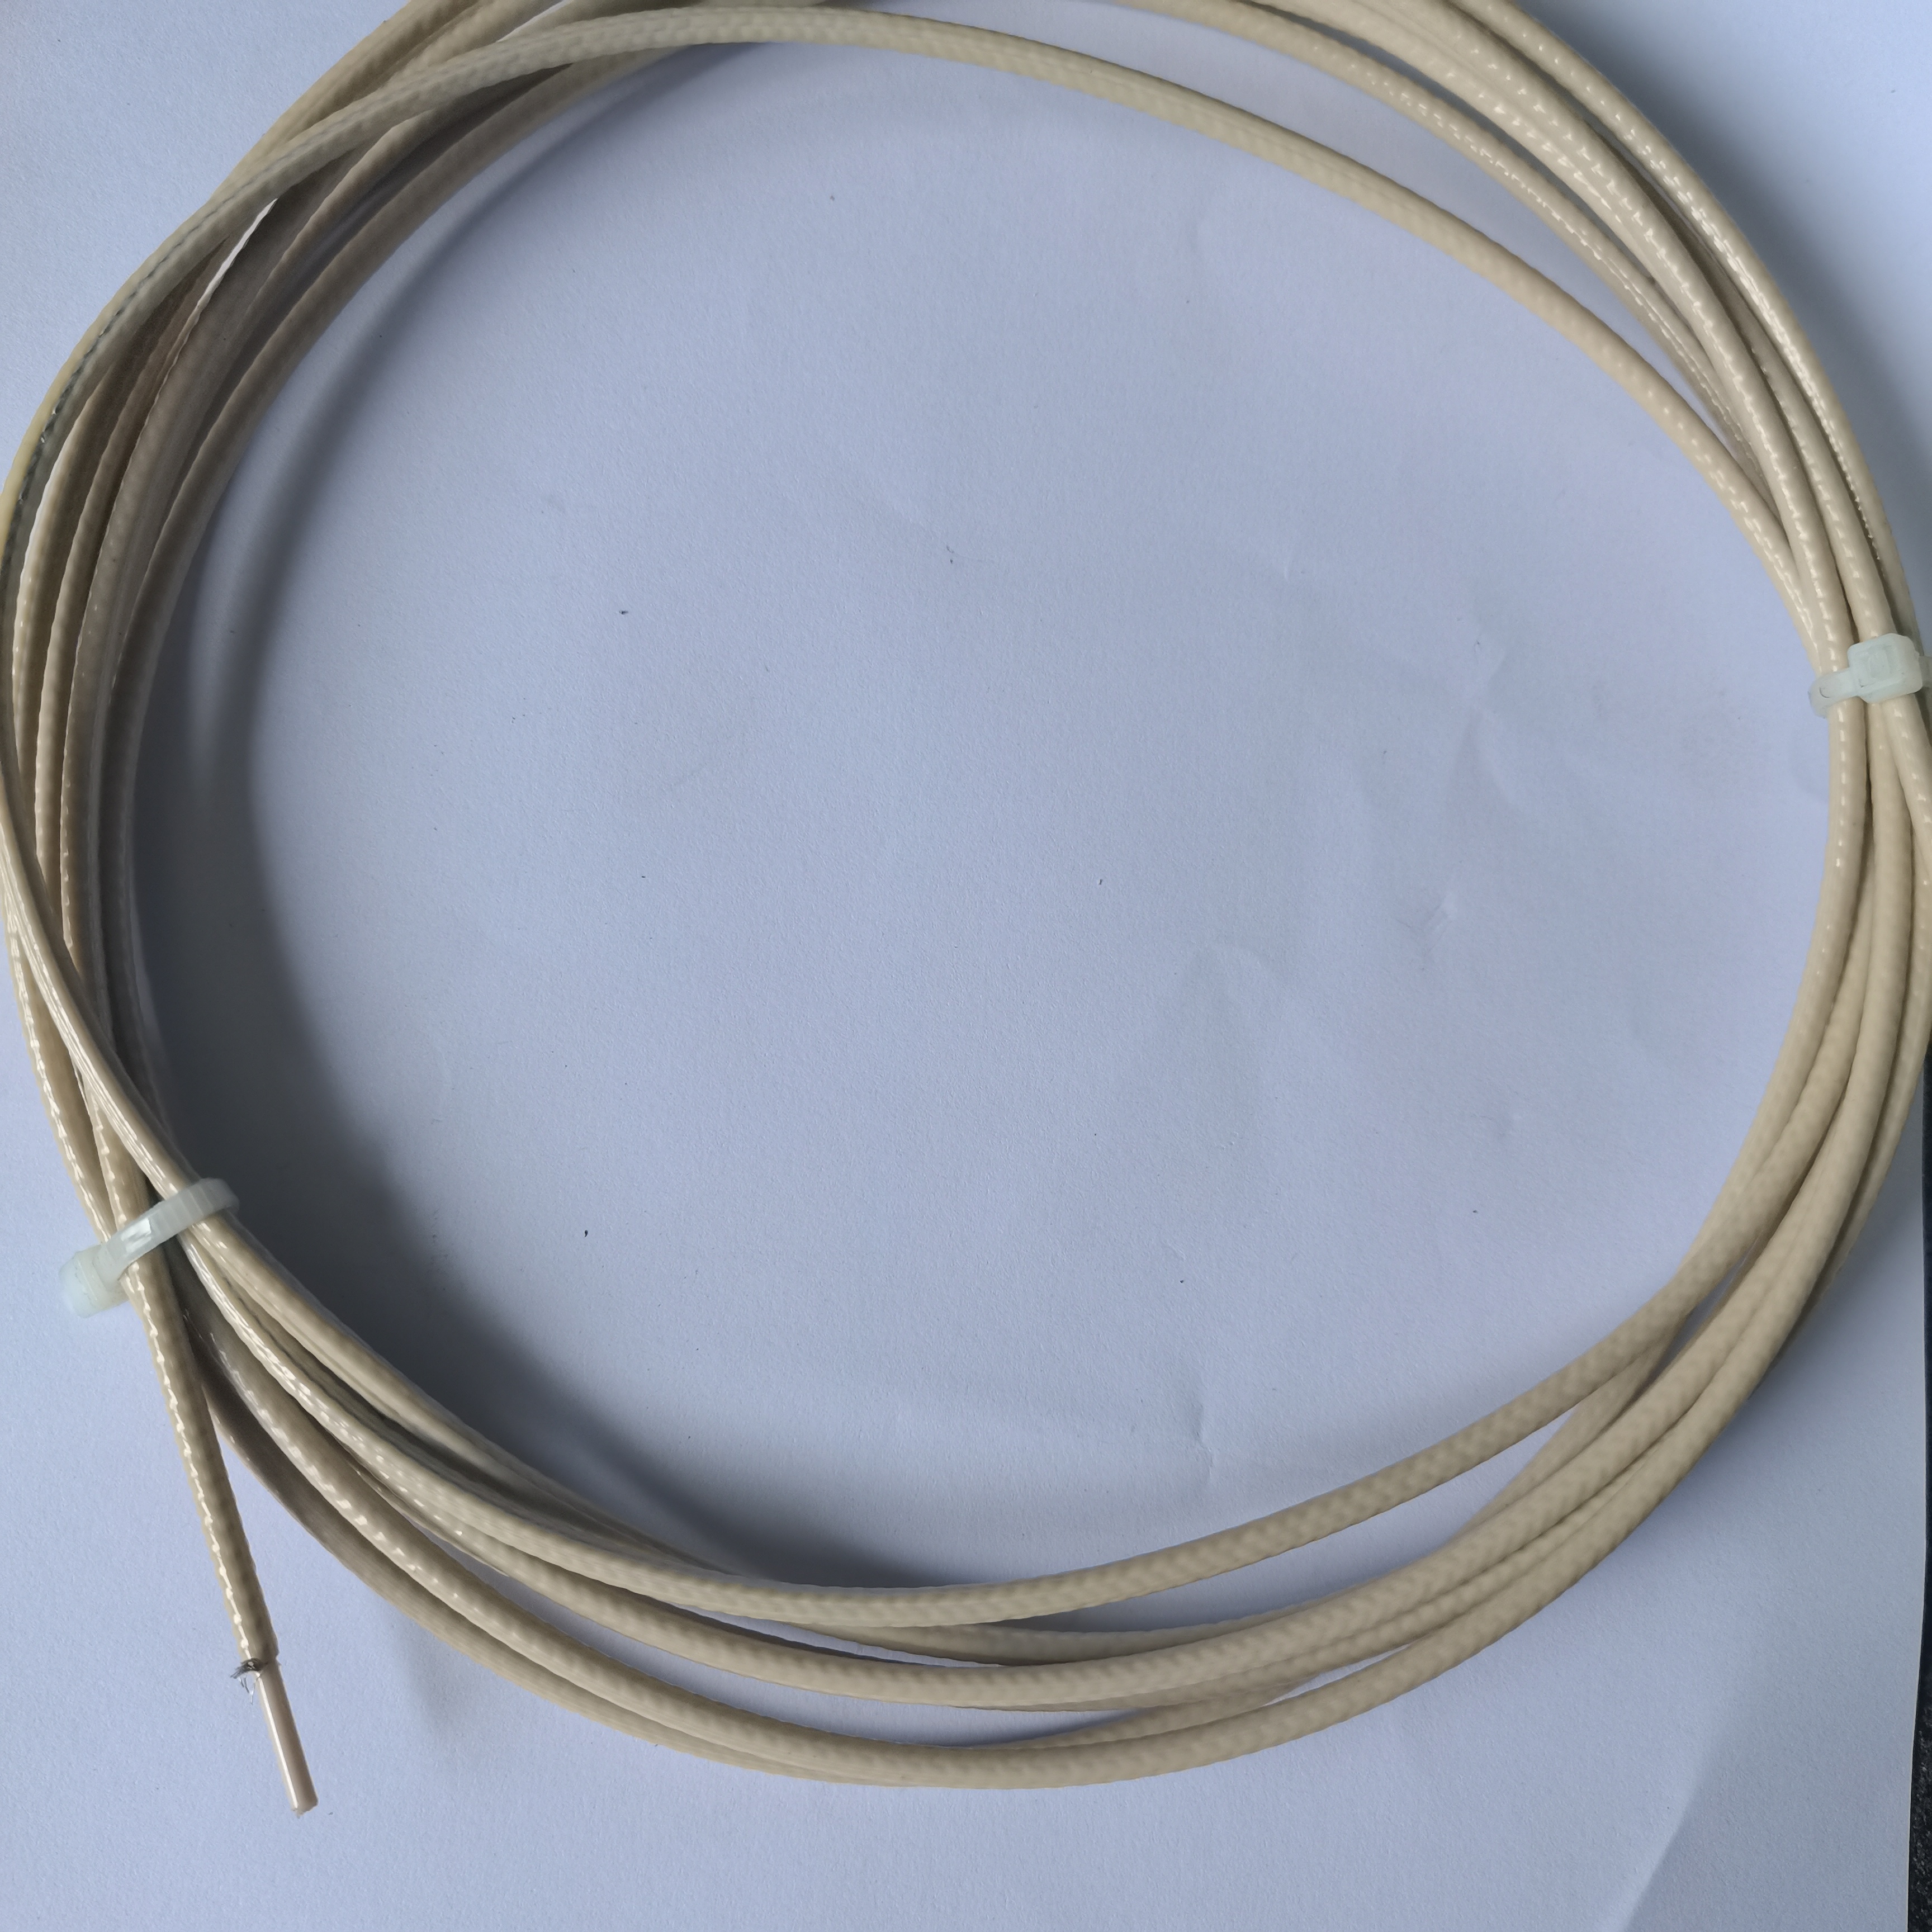 UHV Cables And Low Outgassing Wire